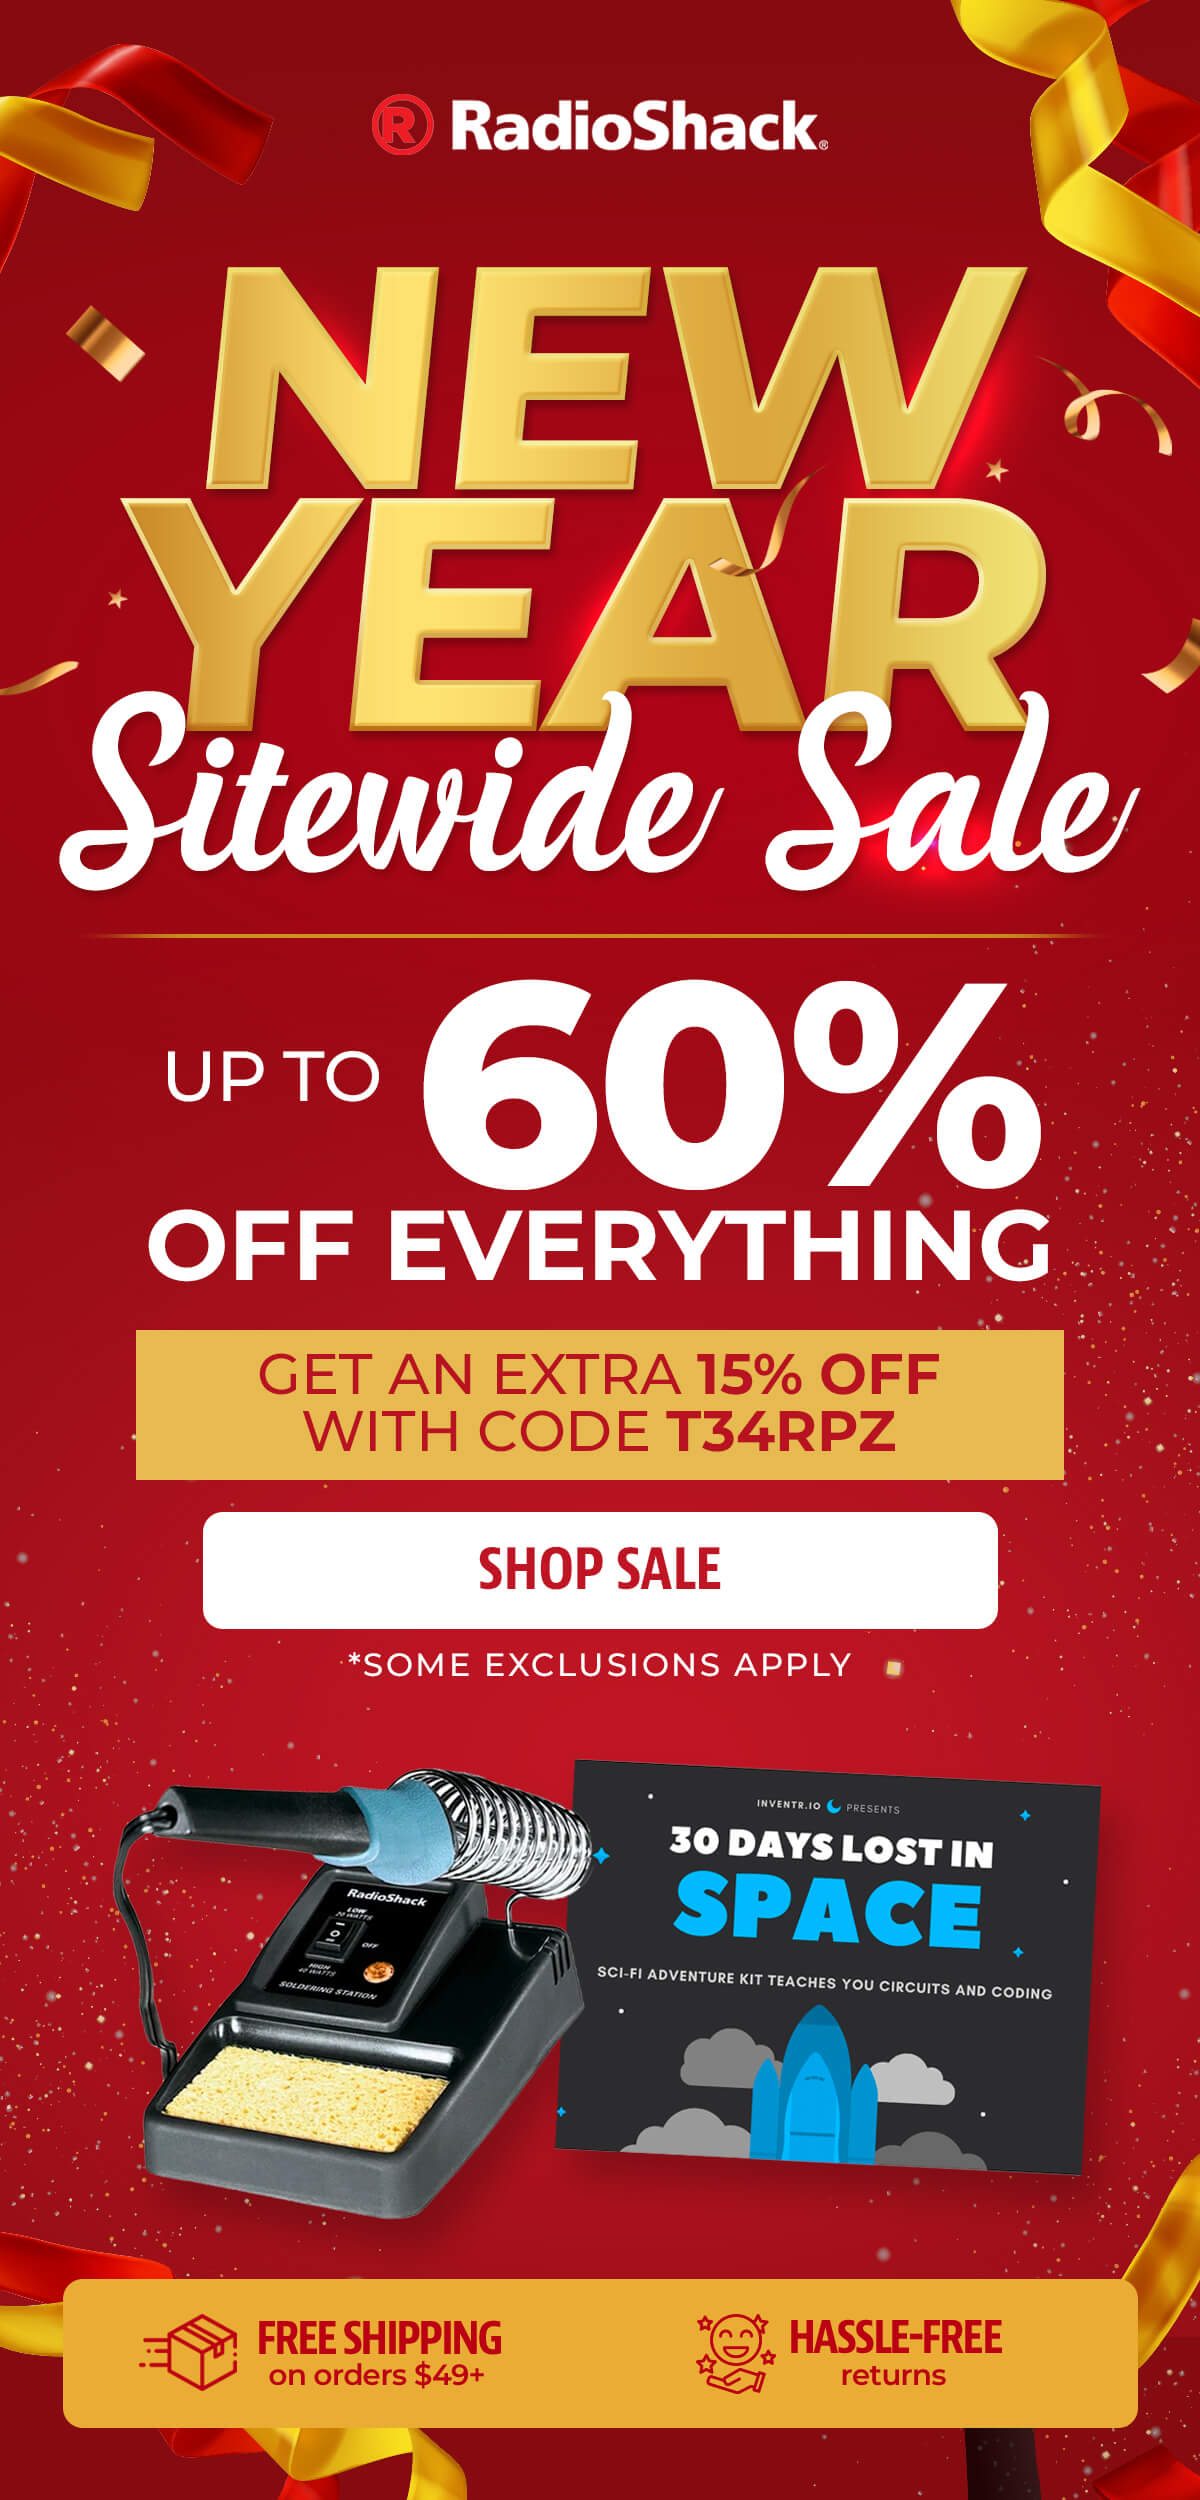 New Year's Sitewide Sale!